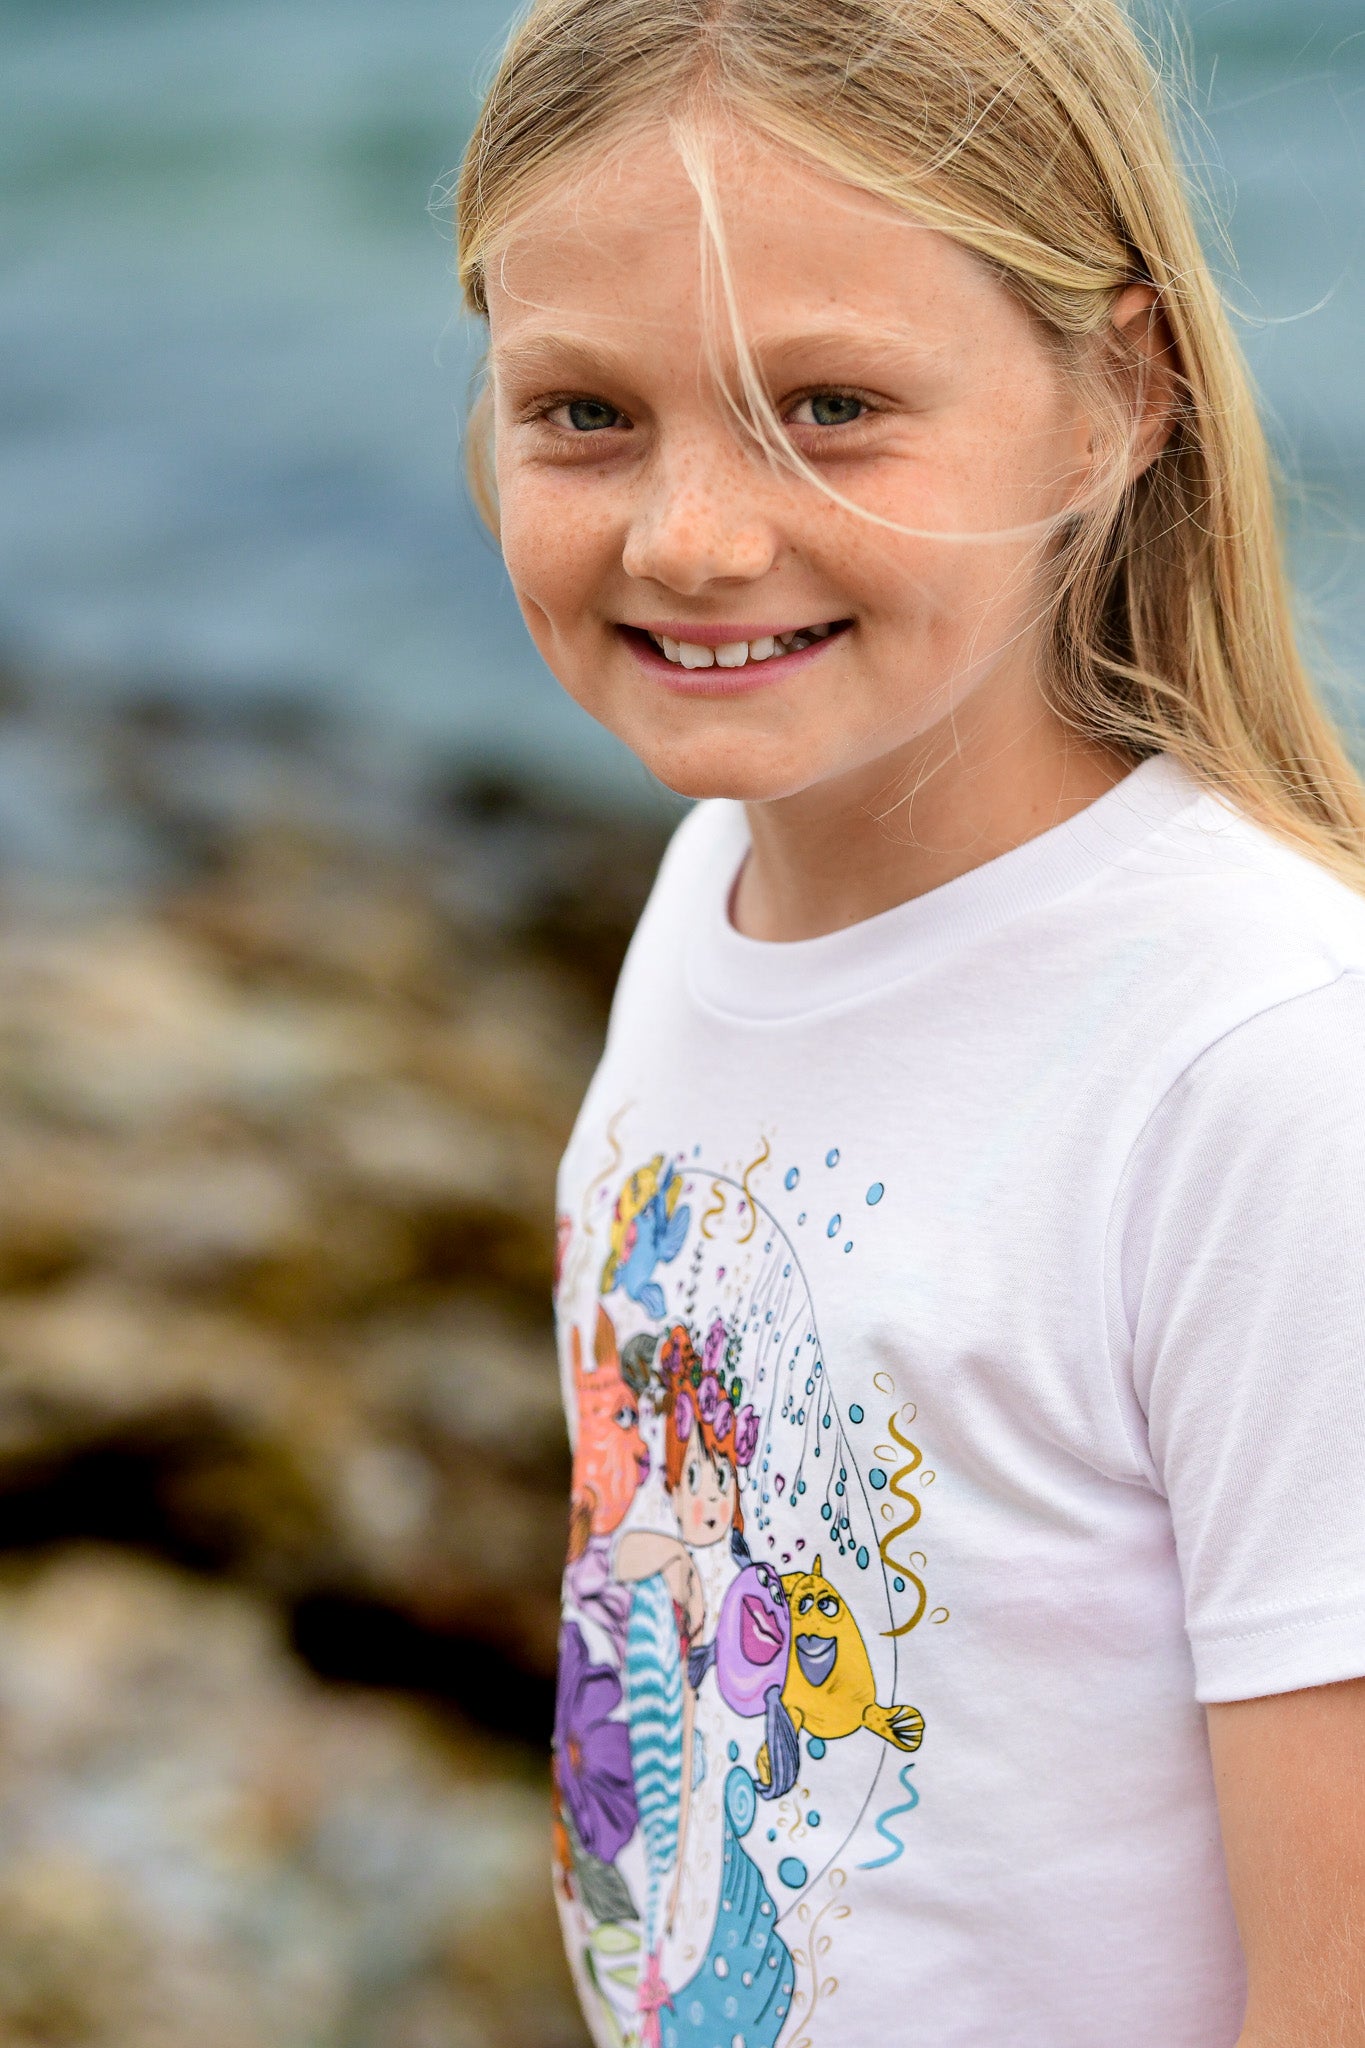 Youth graphic tees ages 6-18 Youth unisex sizes. Handmade Illustrated graphic Tees for kids